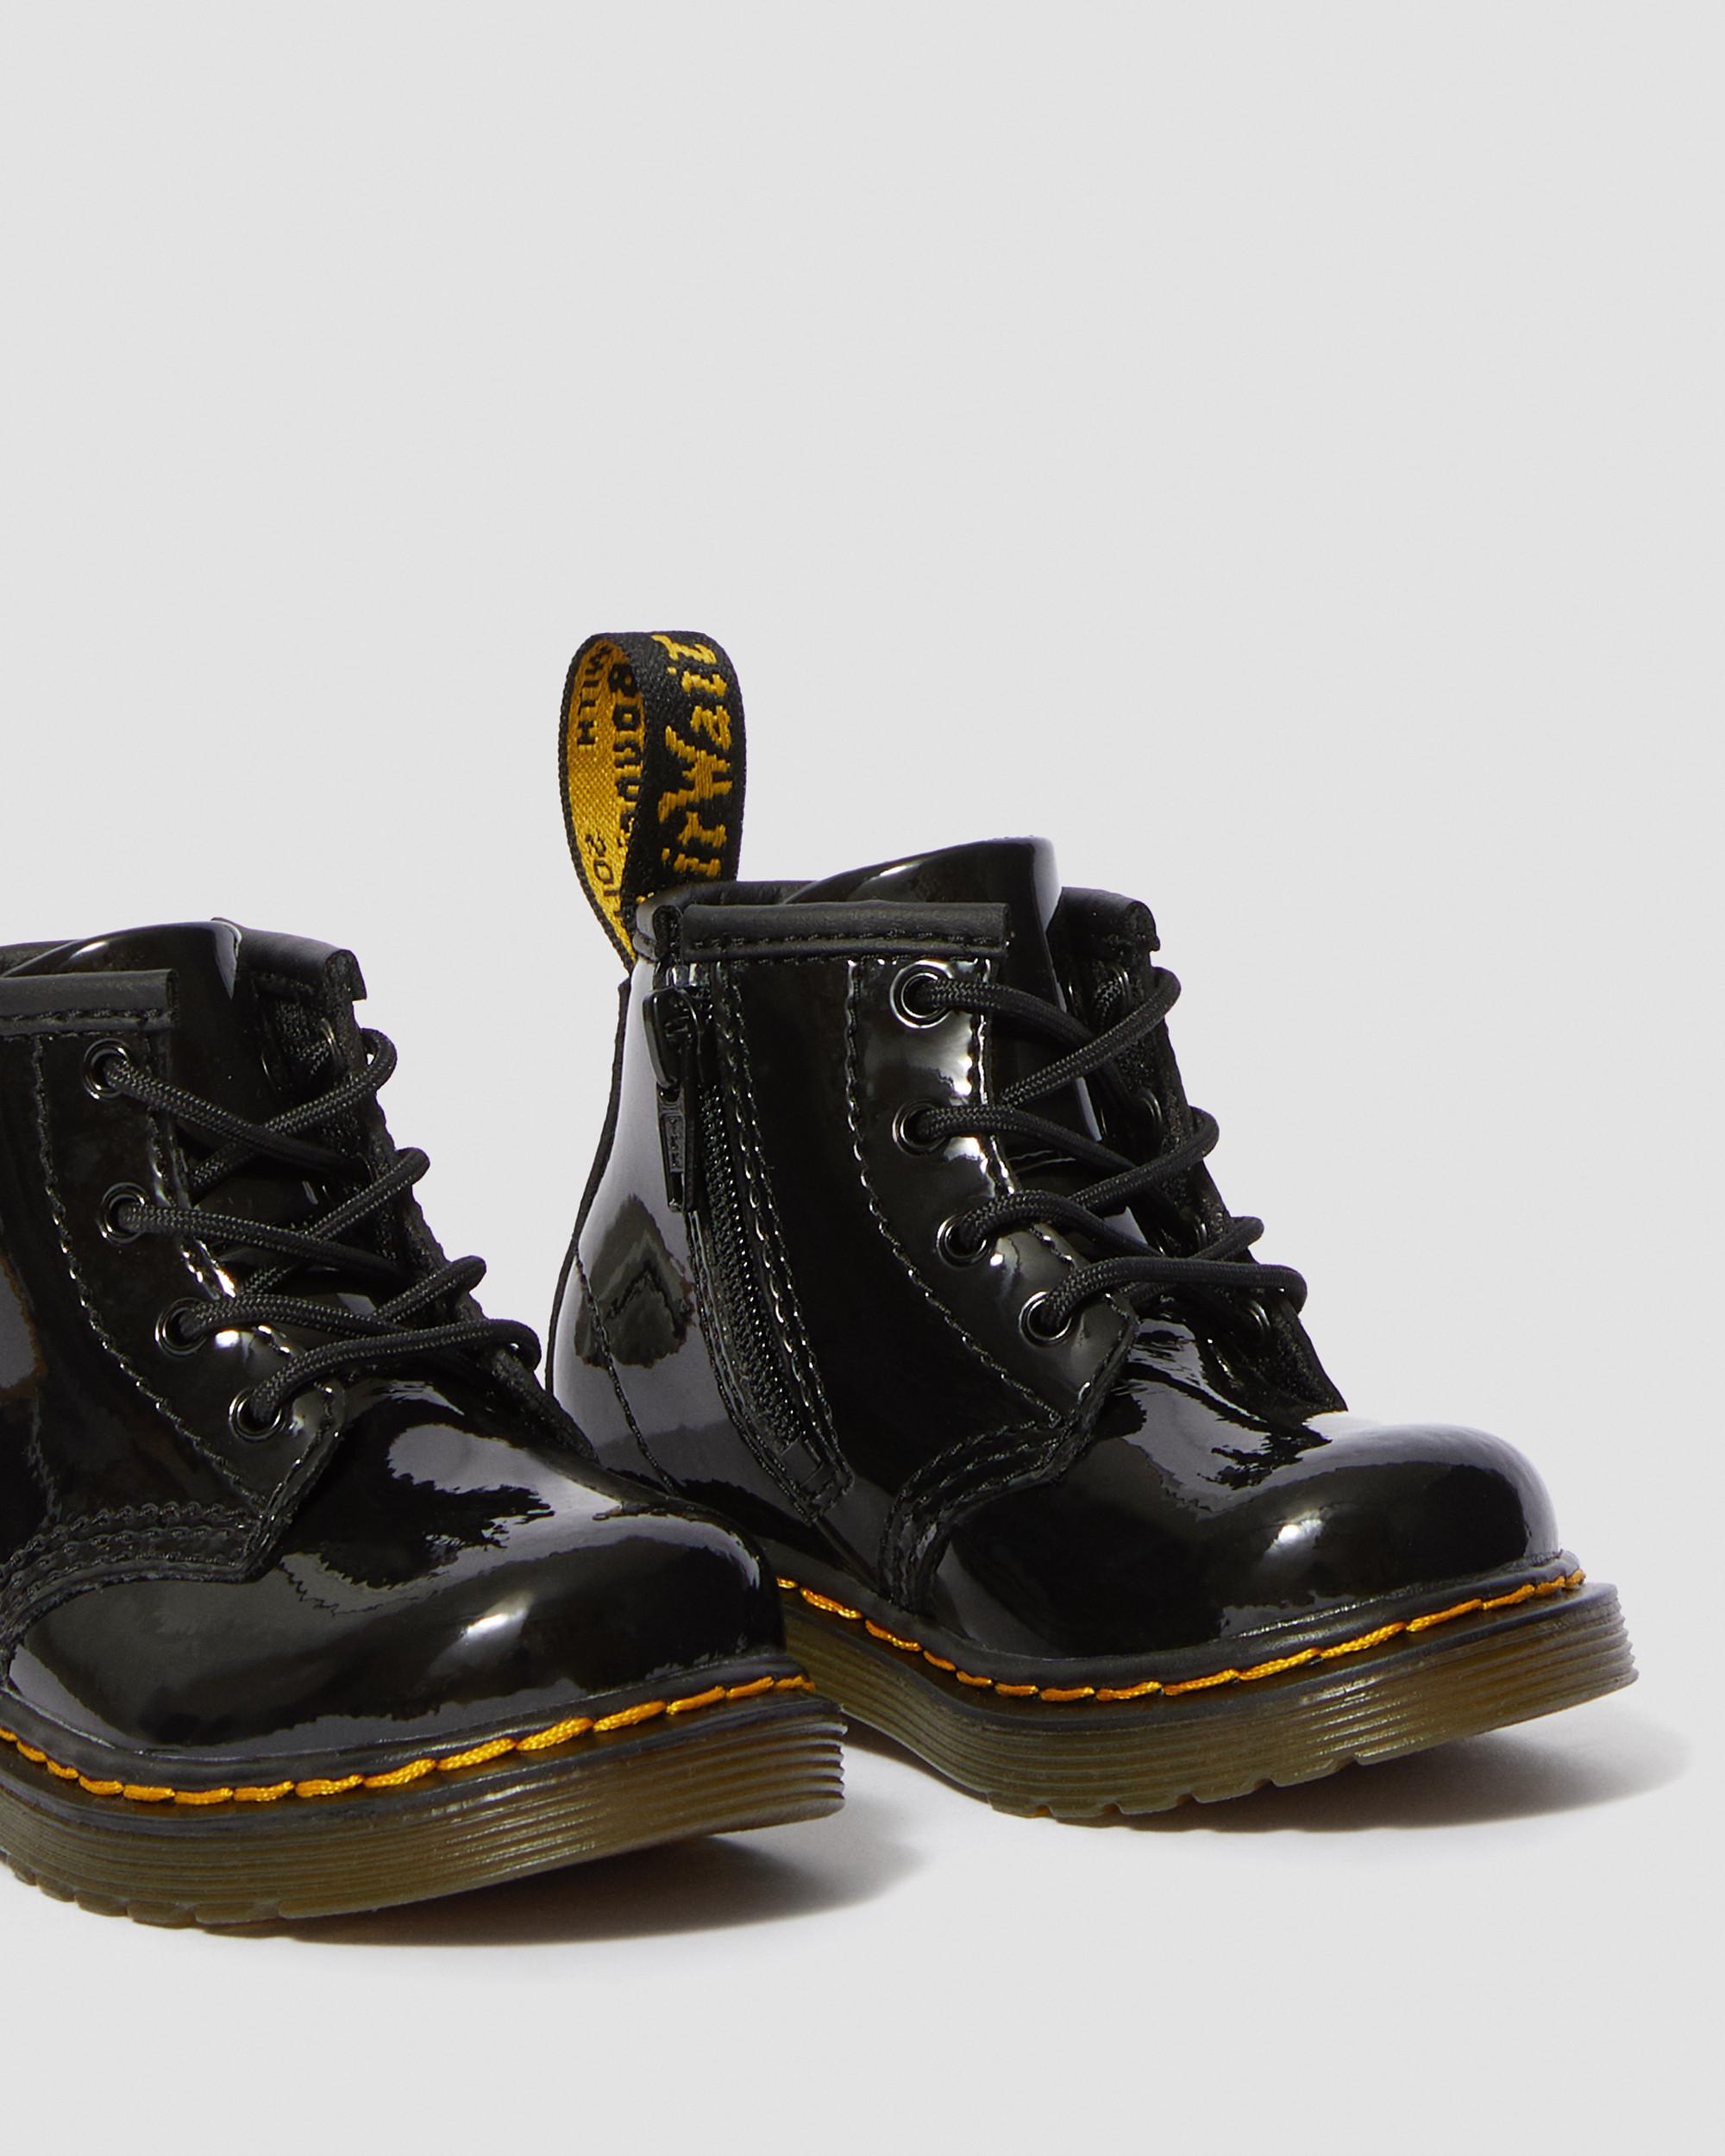 Infant 1460 Patent Leather Lace Up Boots in Black | Dr. Martens